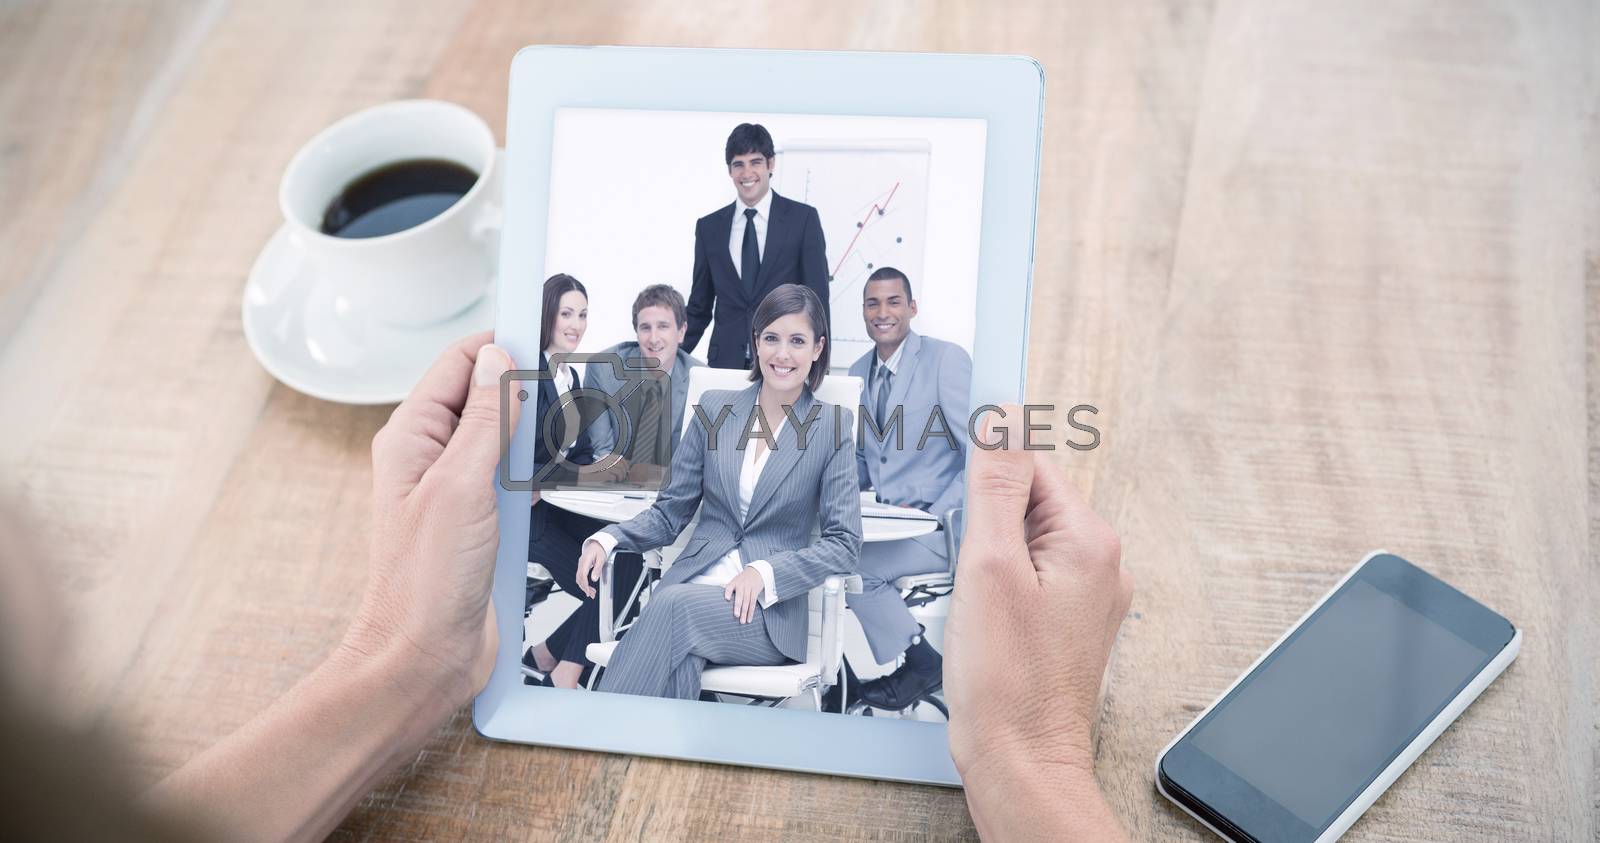 Royalty free image of Composite image of woman using tablet computer at table by Wavebreakmedia